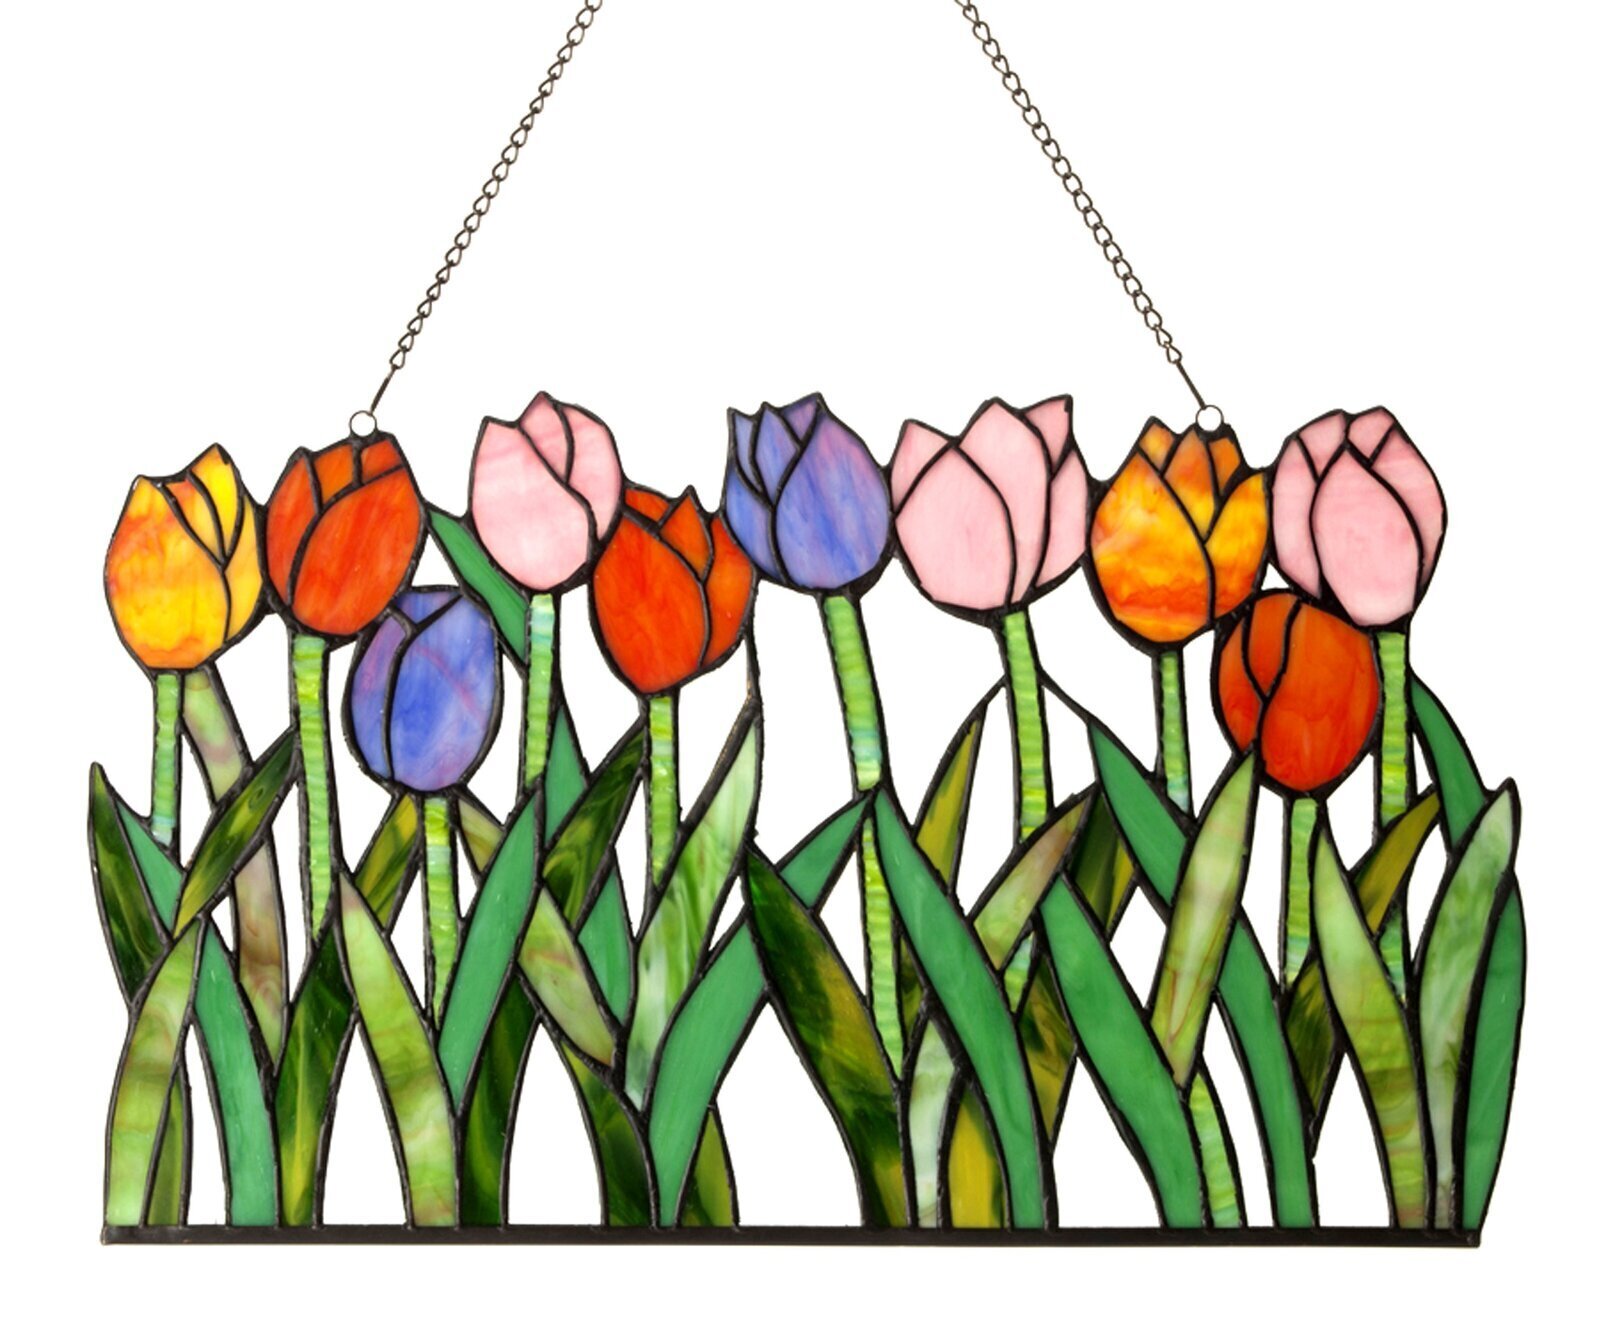 Floral stained glass windows decorations